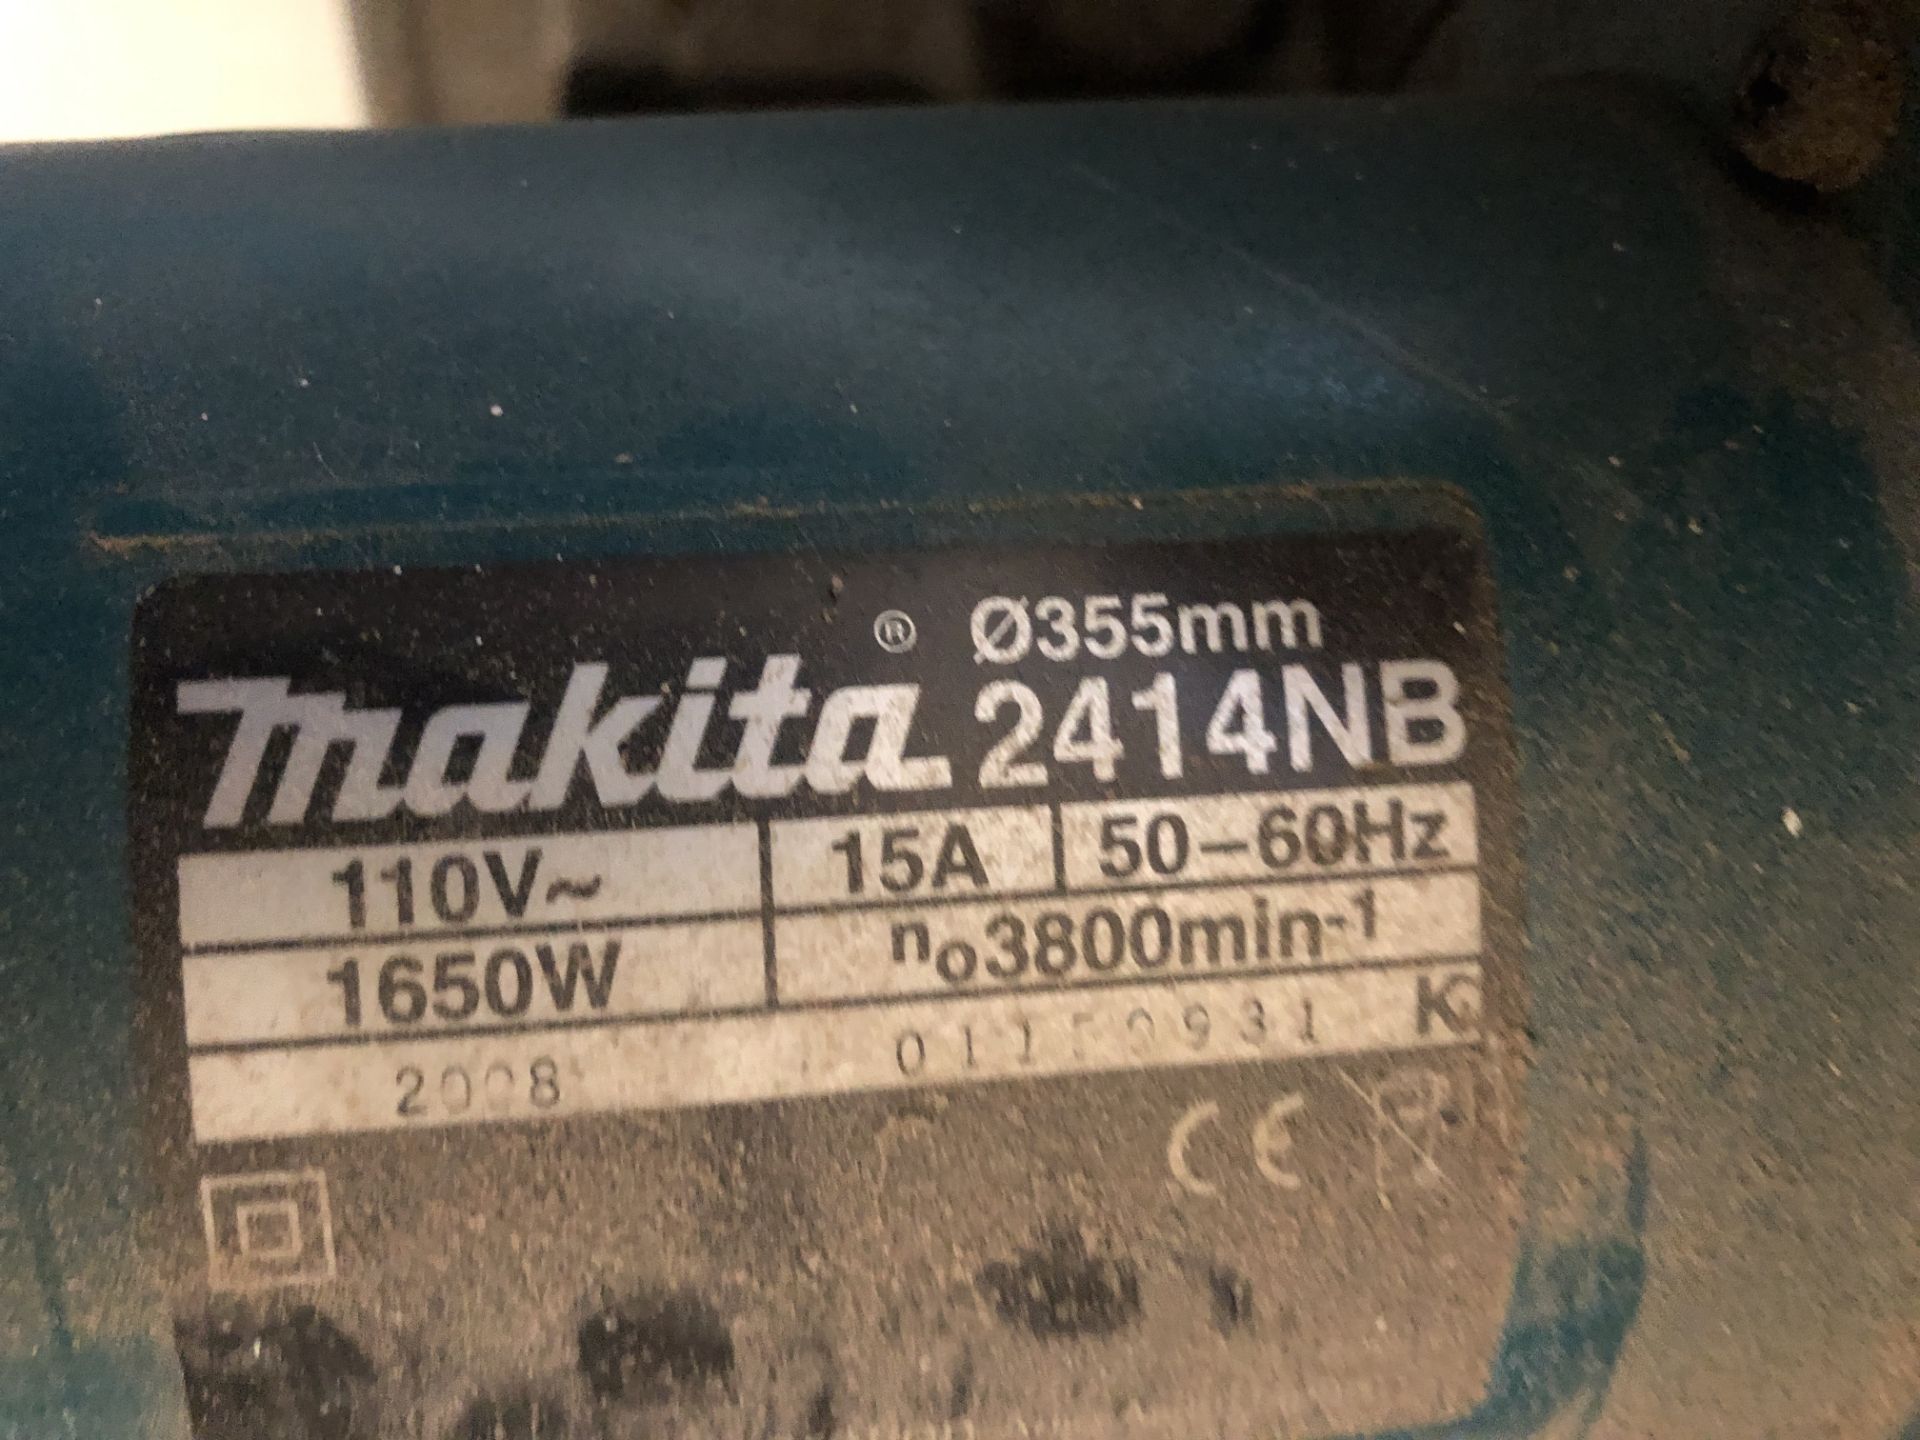 Matika Saw 110v 2414NB (2008) Serial No: 01159931K (Please Note: Collection by appointment Tuesday - Image 4 of 5